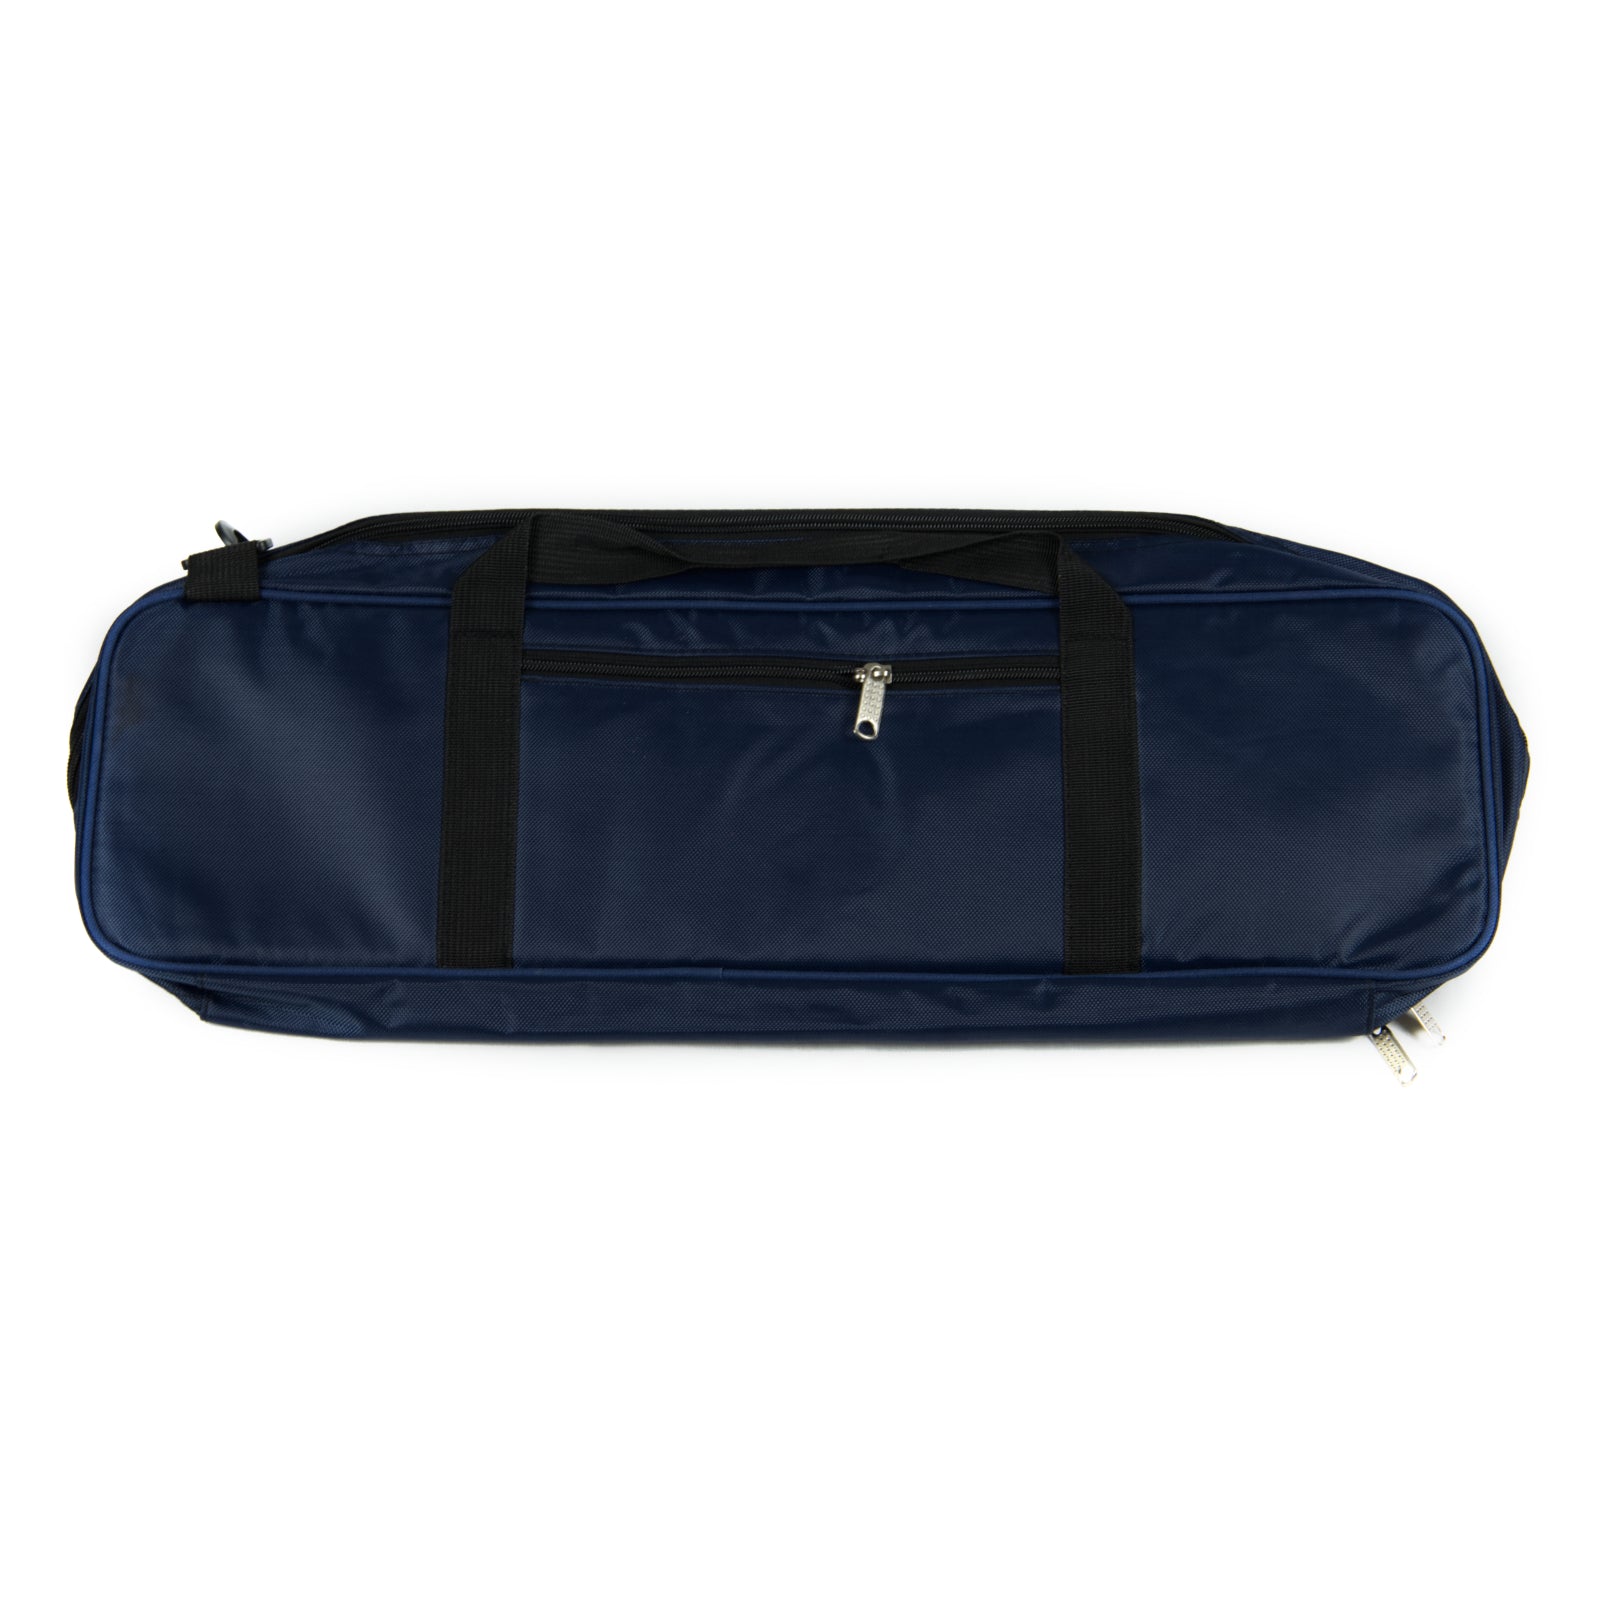 Deluxe Carry All Chess Bag - Navy